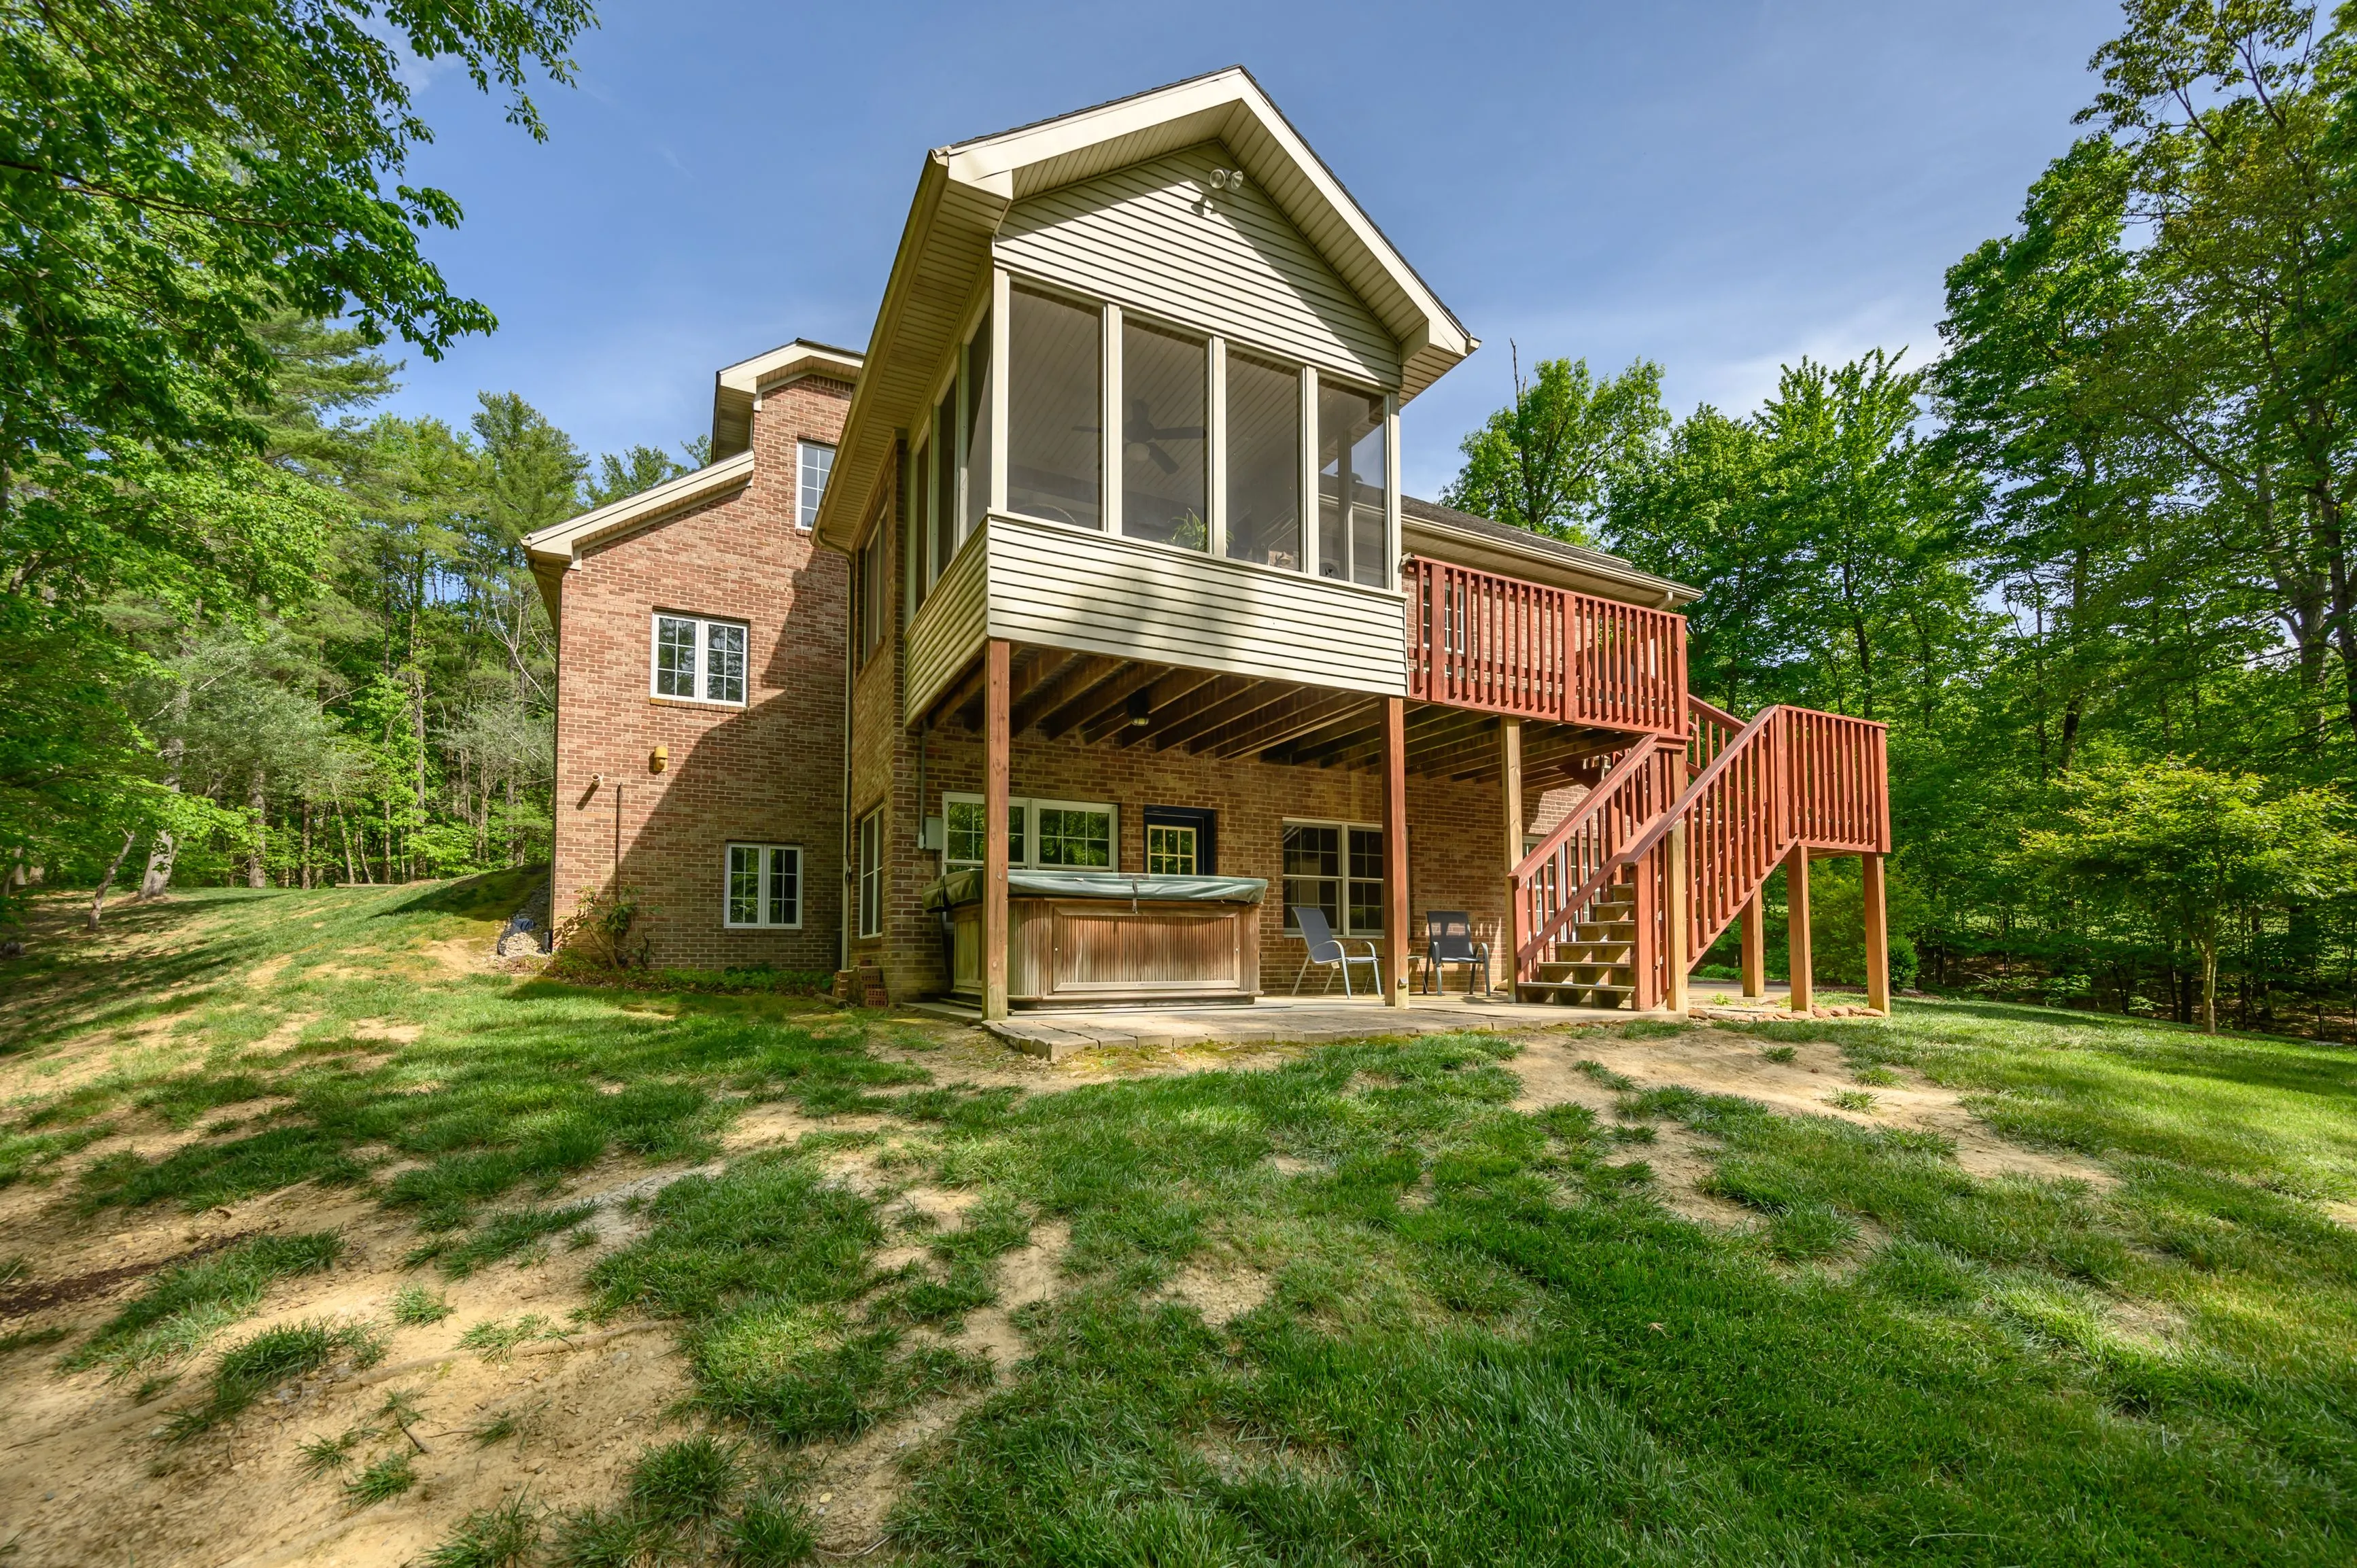 Brick house with screened upper deck, red wooden stairs, and hot tub, surrounded by trees and lawn on a sunny day.